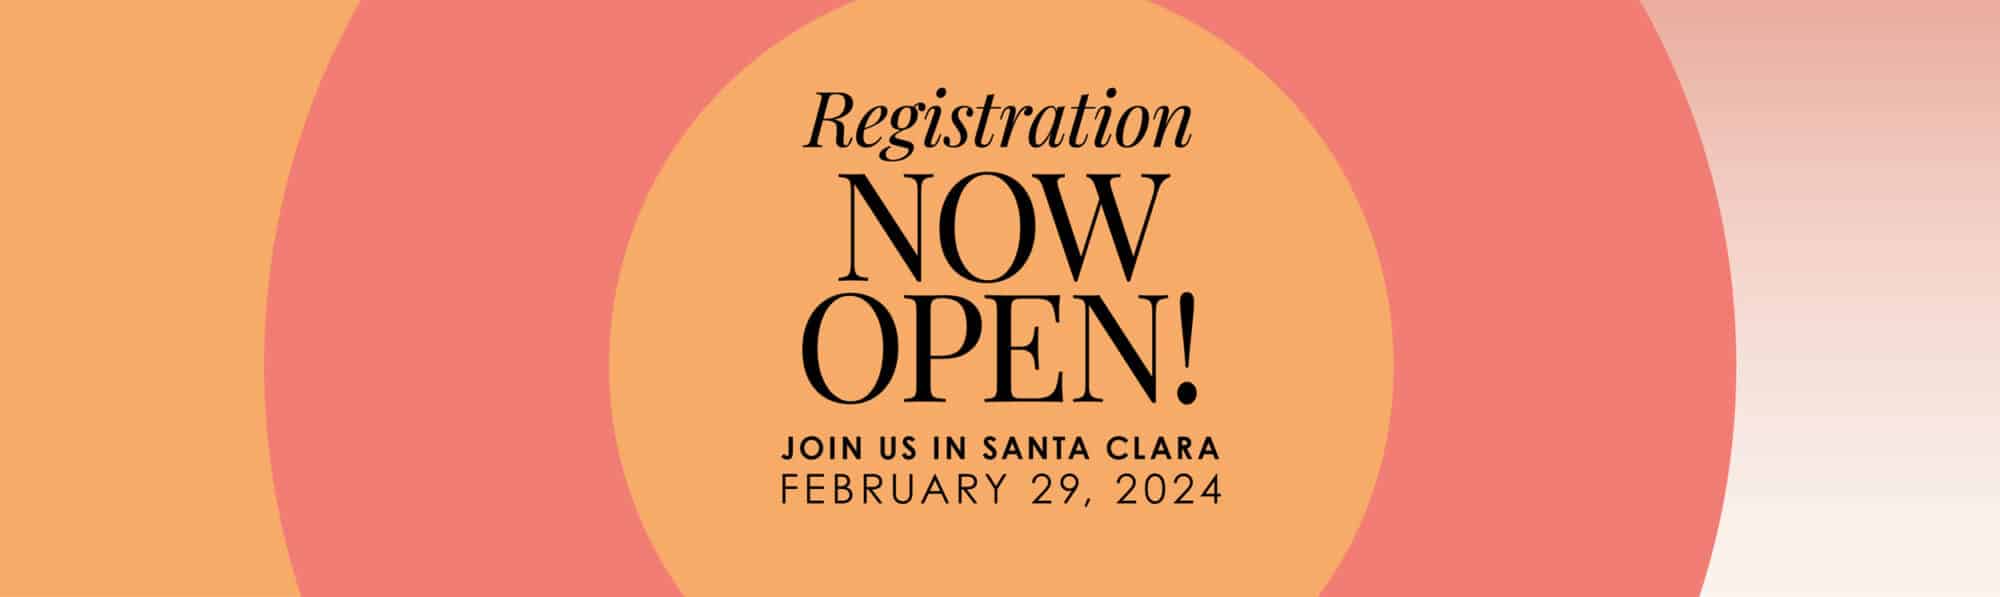 Registration for the 2024 California Conference for Women is NOW OPEN! Join us in person February 29, 2024.